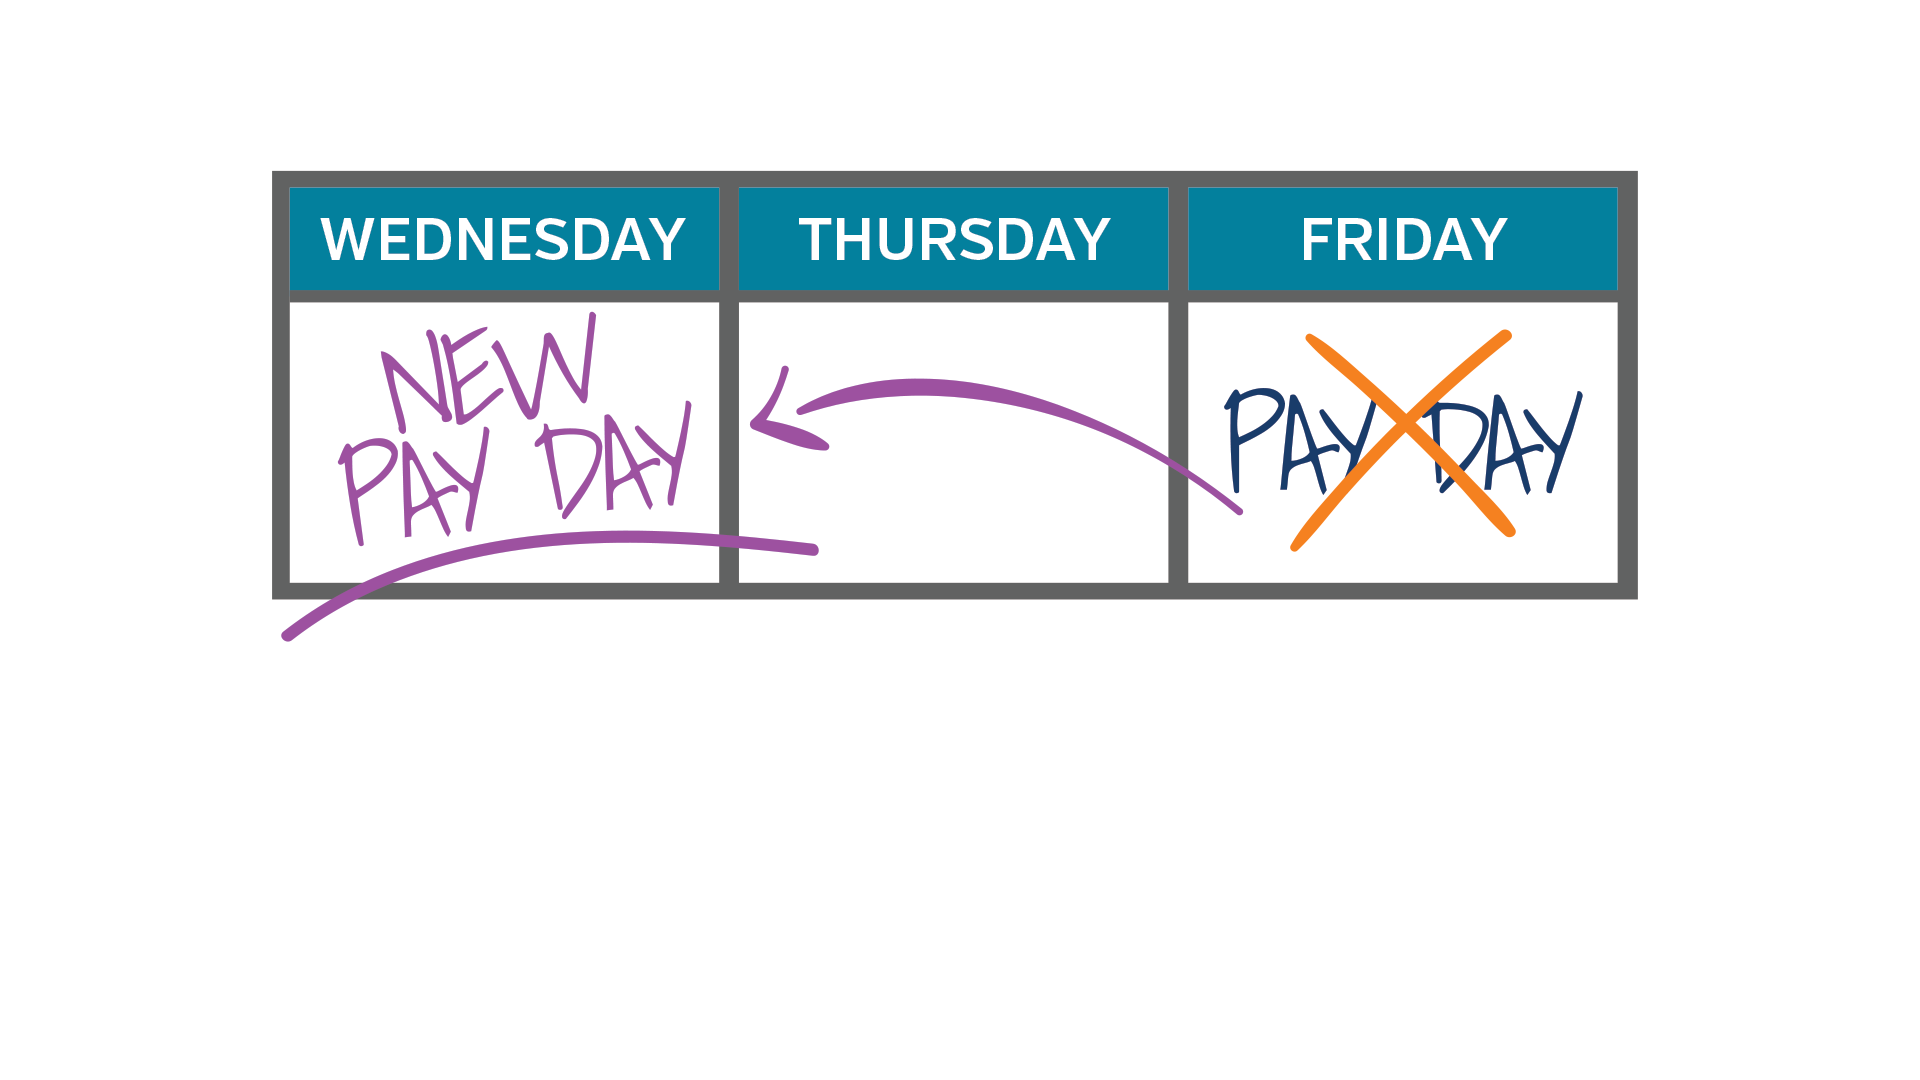 Calendar showing Wednesday payday vs Friday payday